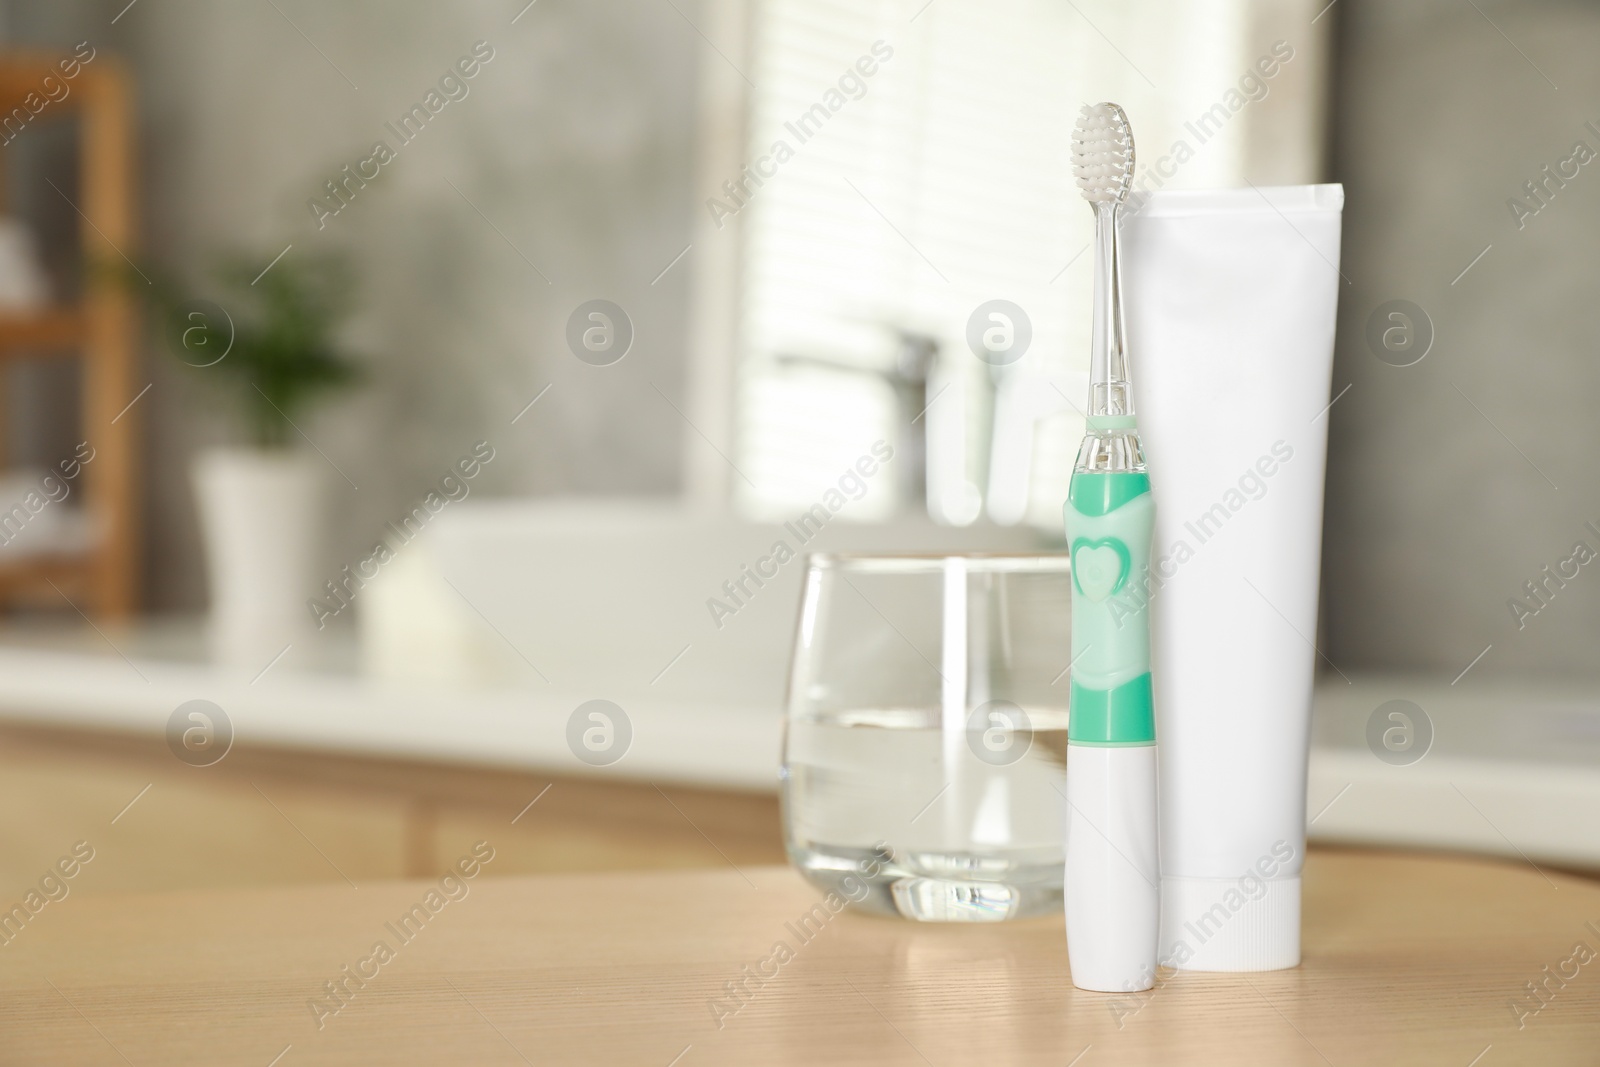 Photo of Electric toothbrush, tube with paste and glass of water on wooden table in bathroom. Space for text